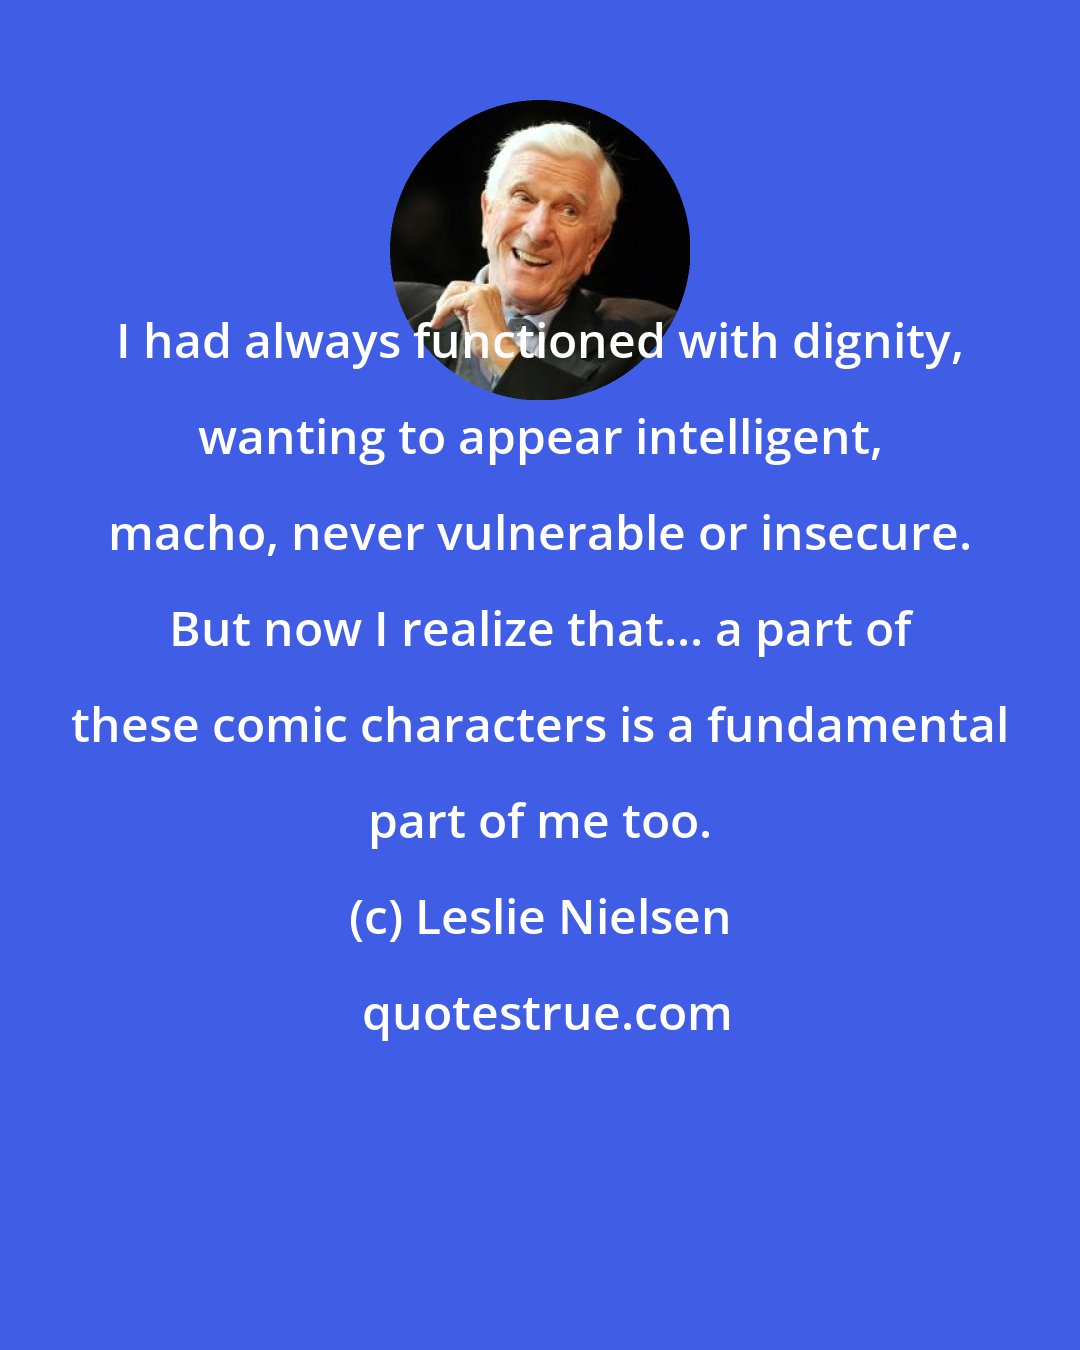 Leslie Nielsen: I had always functioned with dignity, wanting to appear intelligent, macho, never vulnerable or insecure. But now I realize that... a part of these comic characters is a fundamental part of me too.